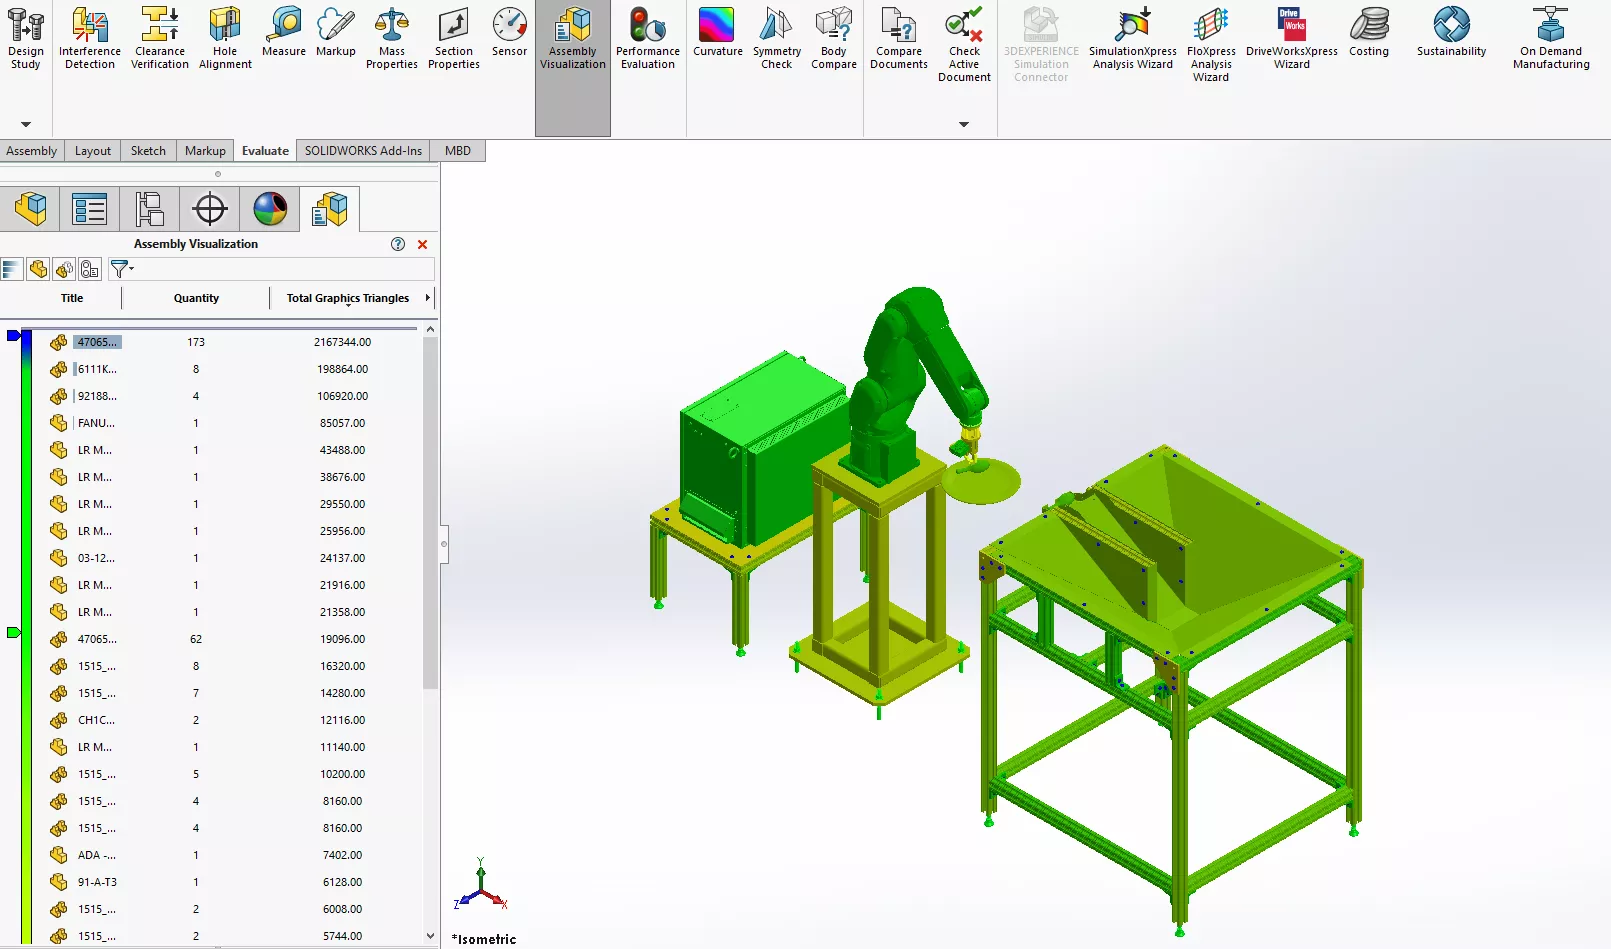 SOLIDWORKS Assembly Visualization